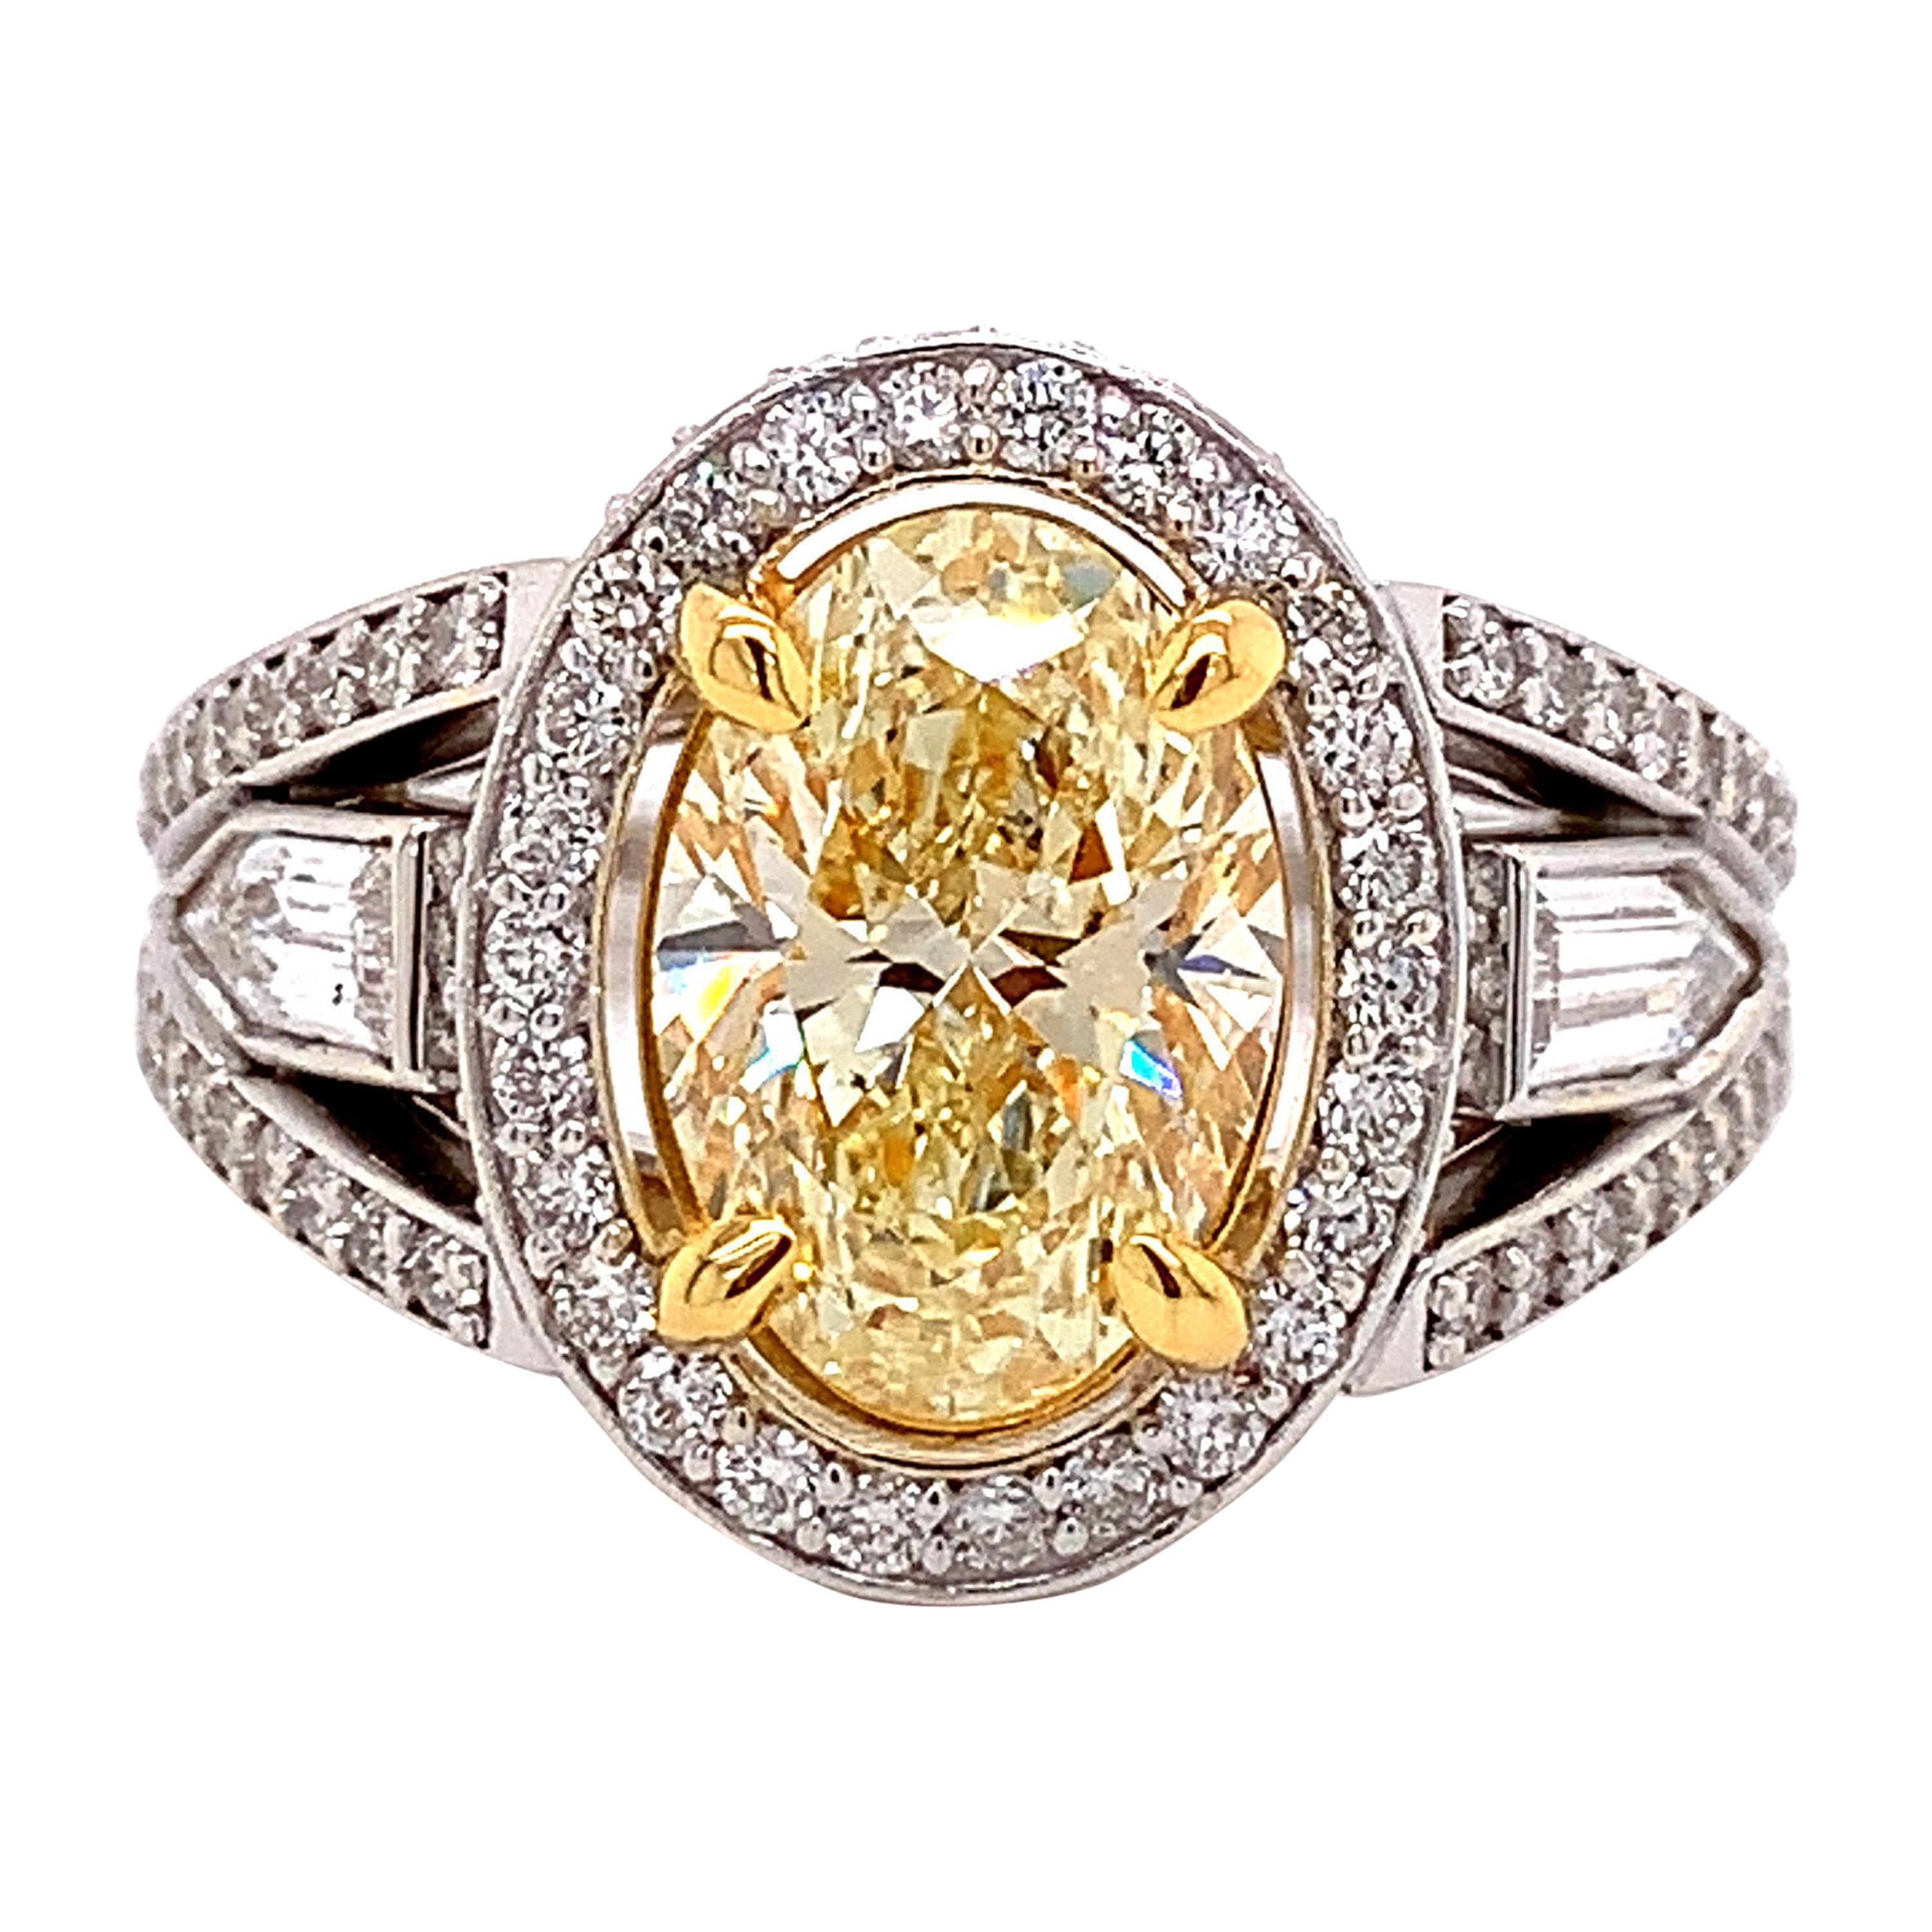 GIA Certified Yellow Oval Shaped Diamond Engagement Ring 3.13 CTTW